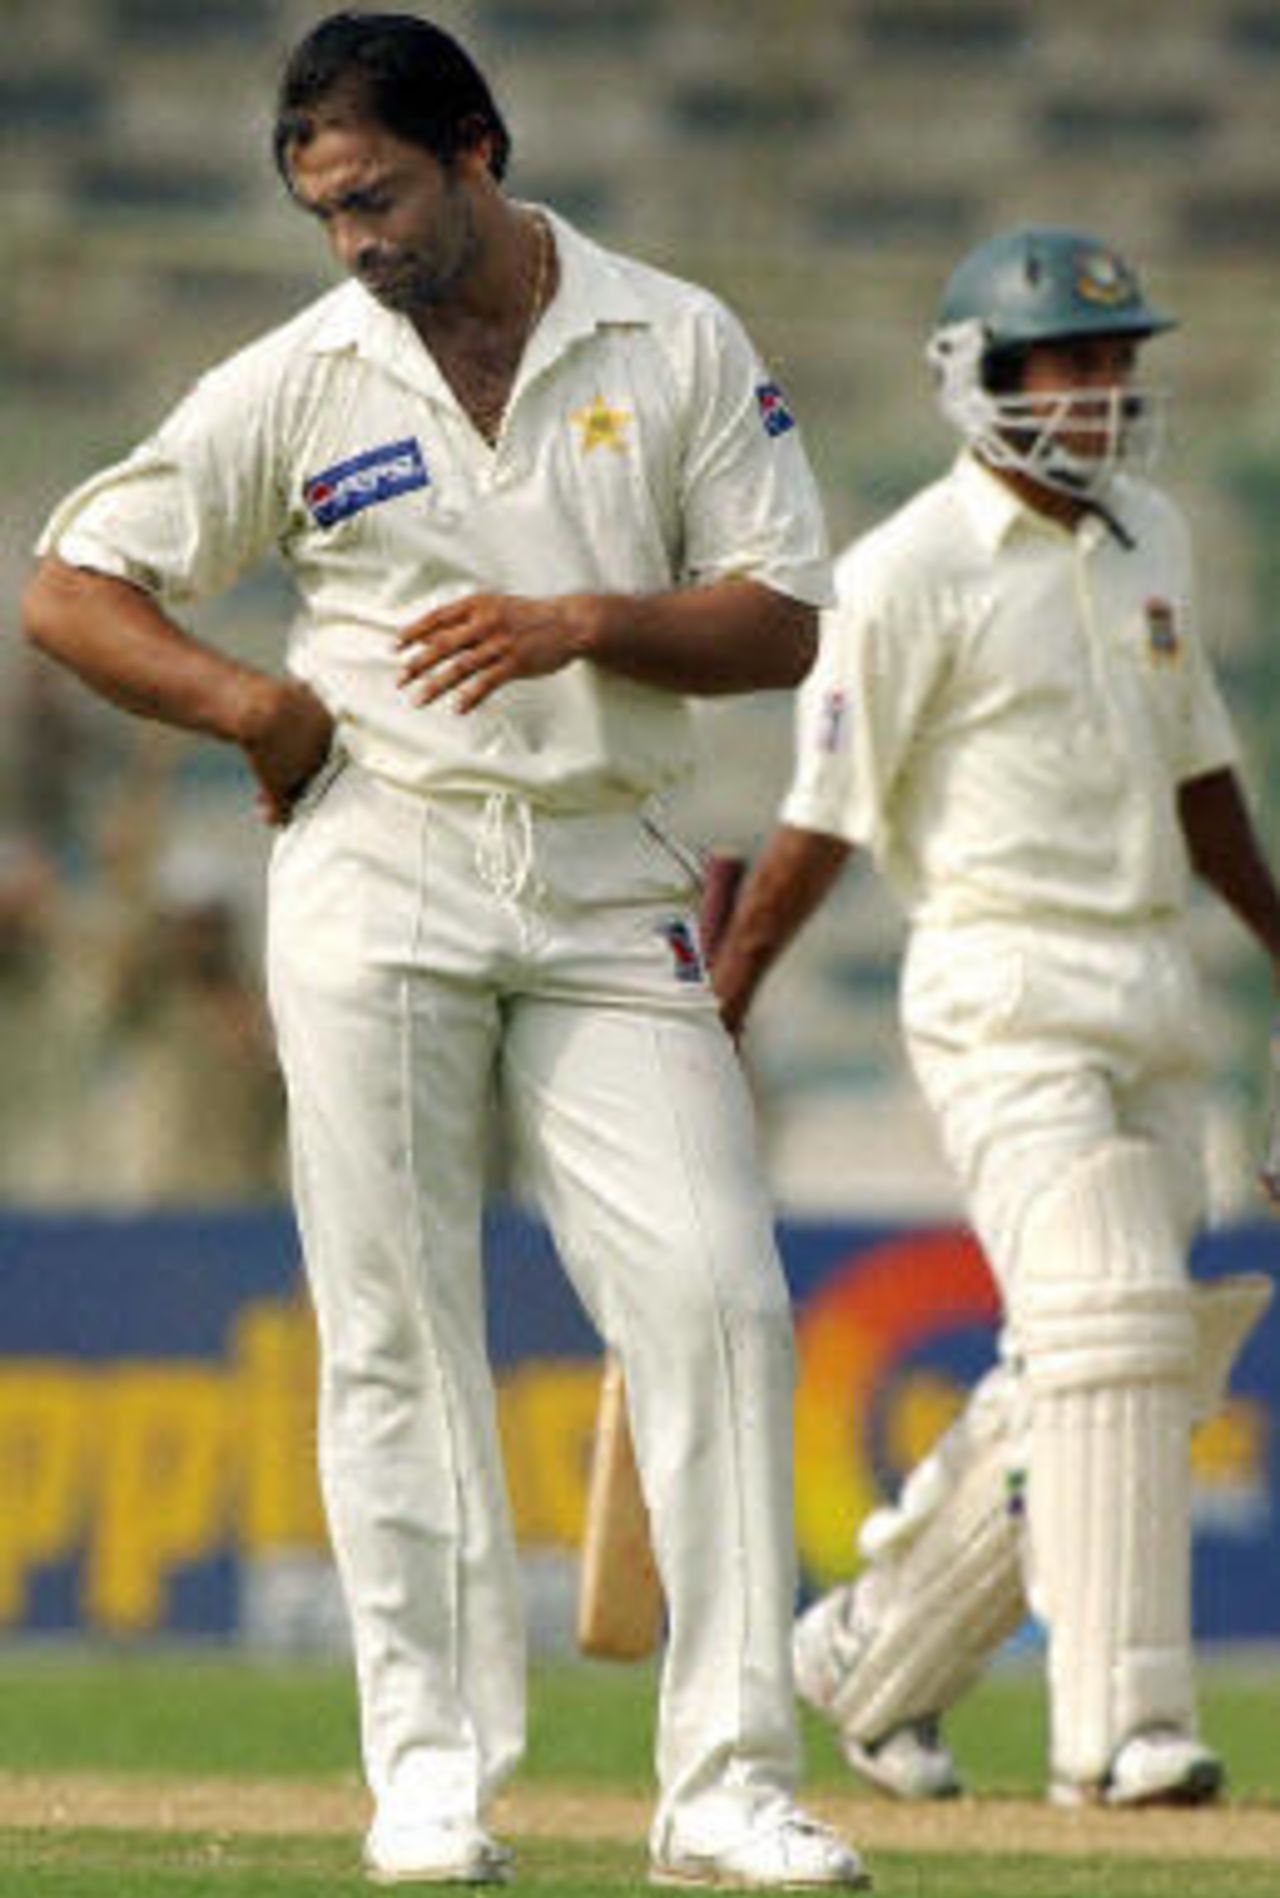 Shoaib Akhtar (L) looks downcast as Habibul Bashar (L) walks by during the third day of the first Test match between Pakistan and Bangladesh in Karachi, 22 August 2003.